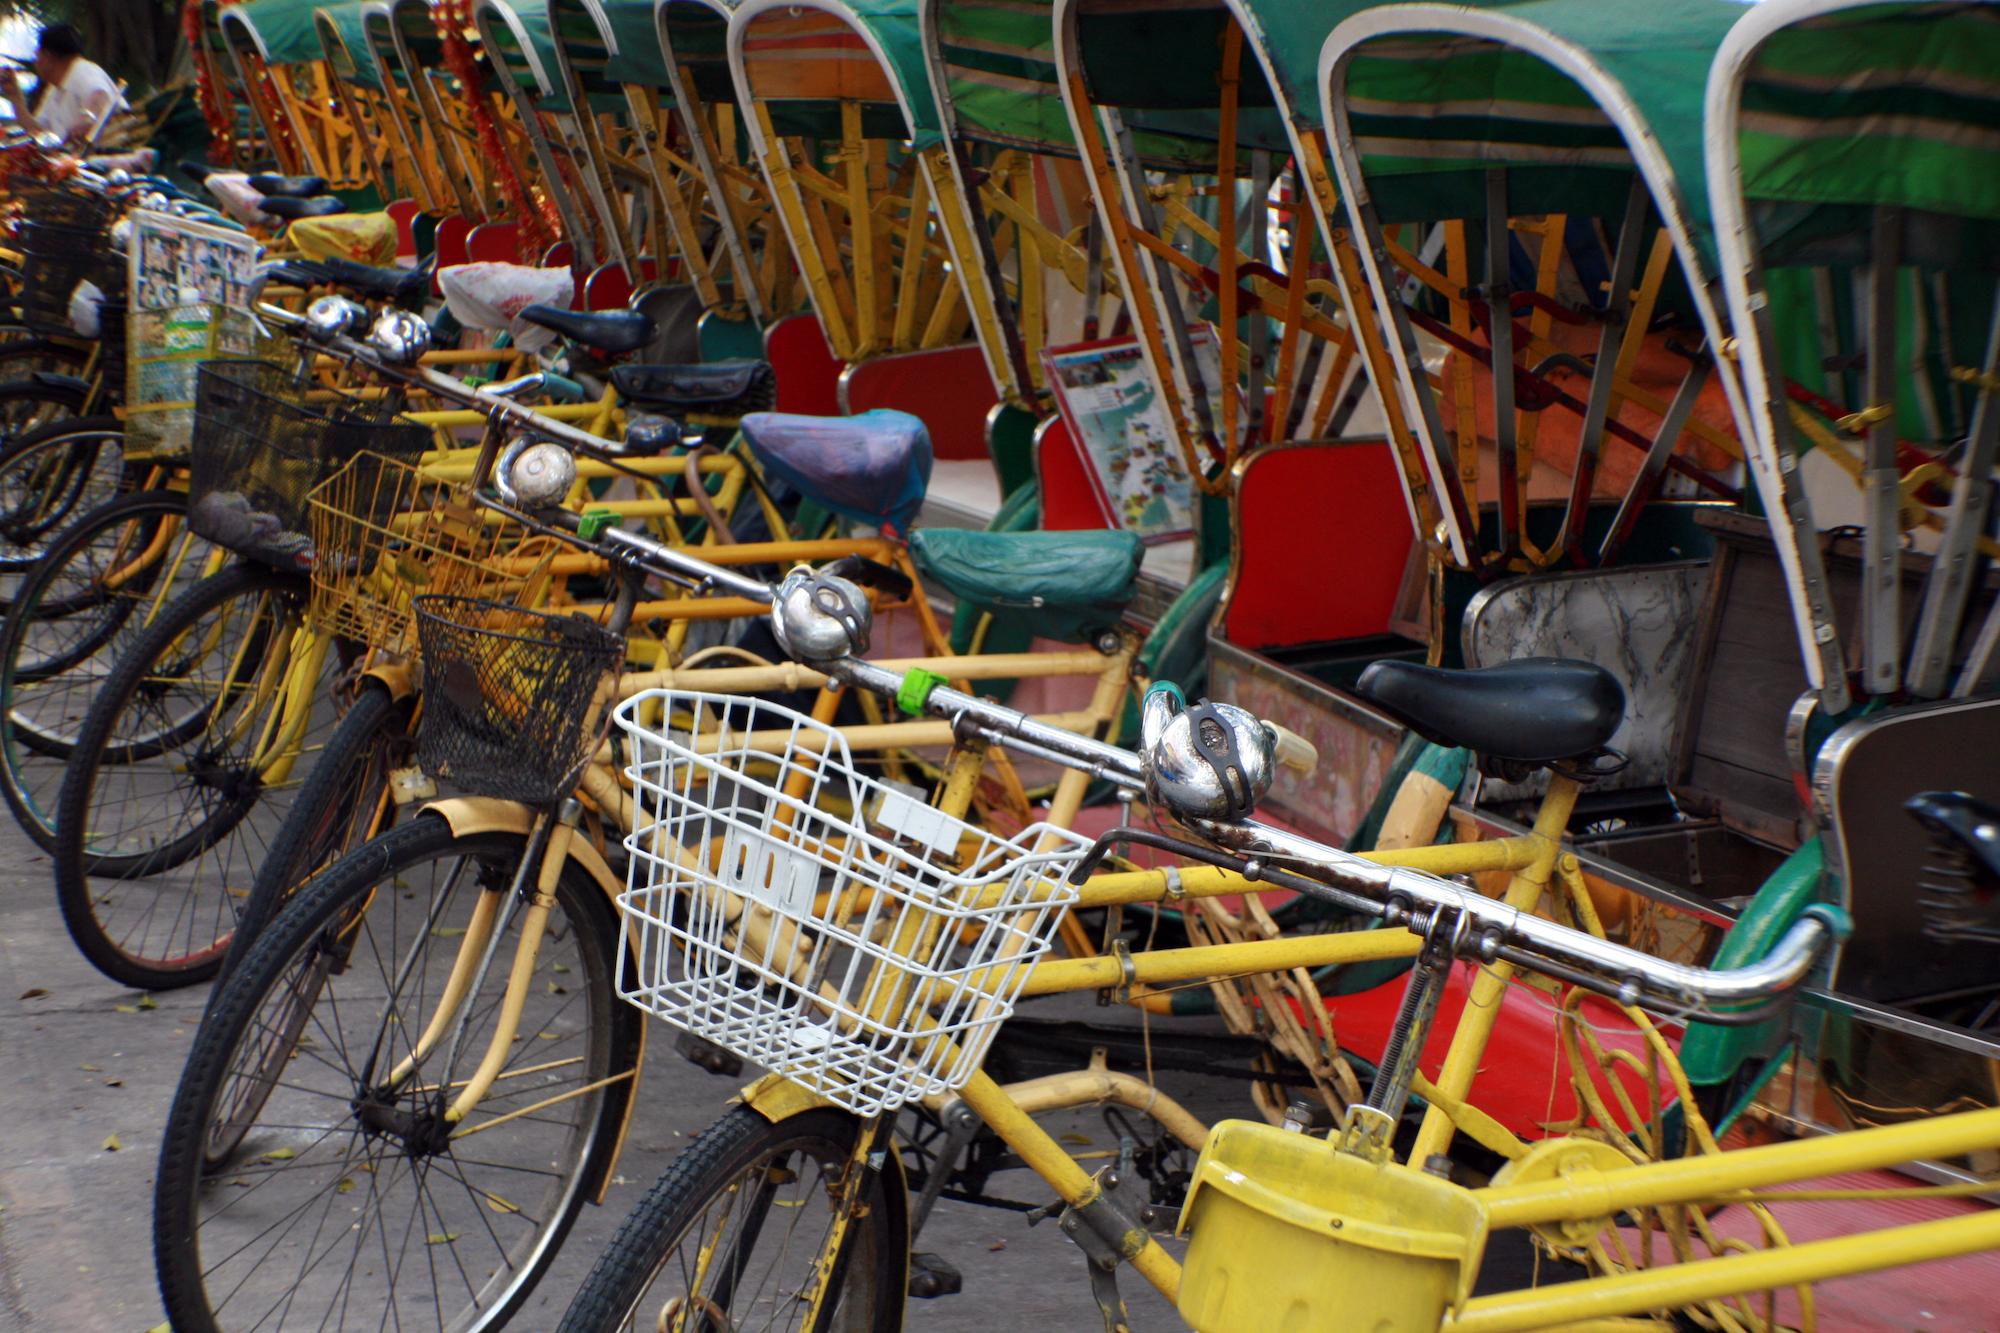 Macao’s rickshaw drivers are struggling. Can this nostalgic form of transportation be revived?